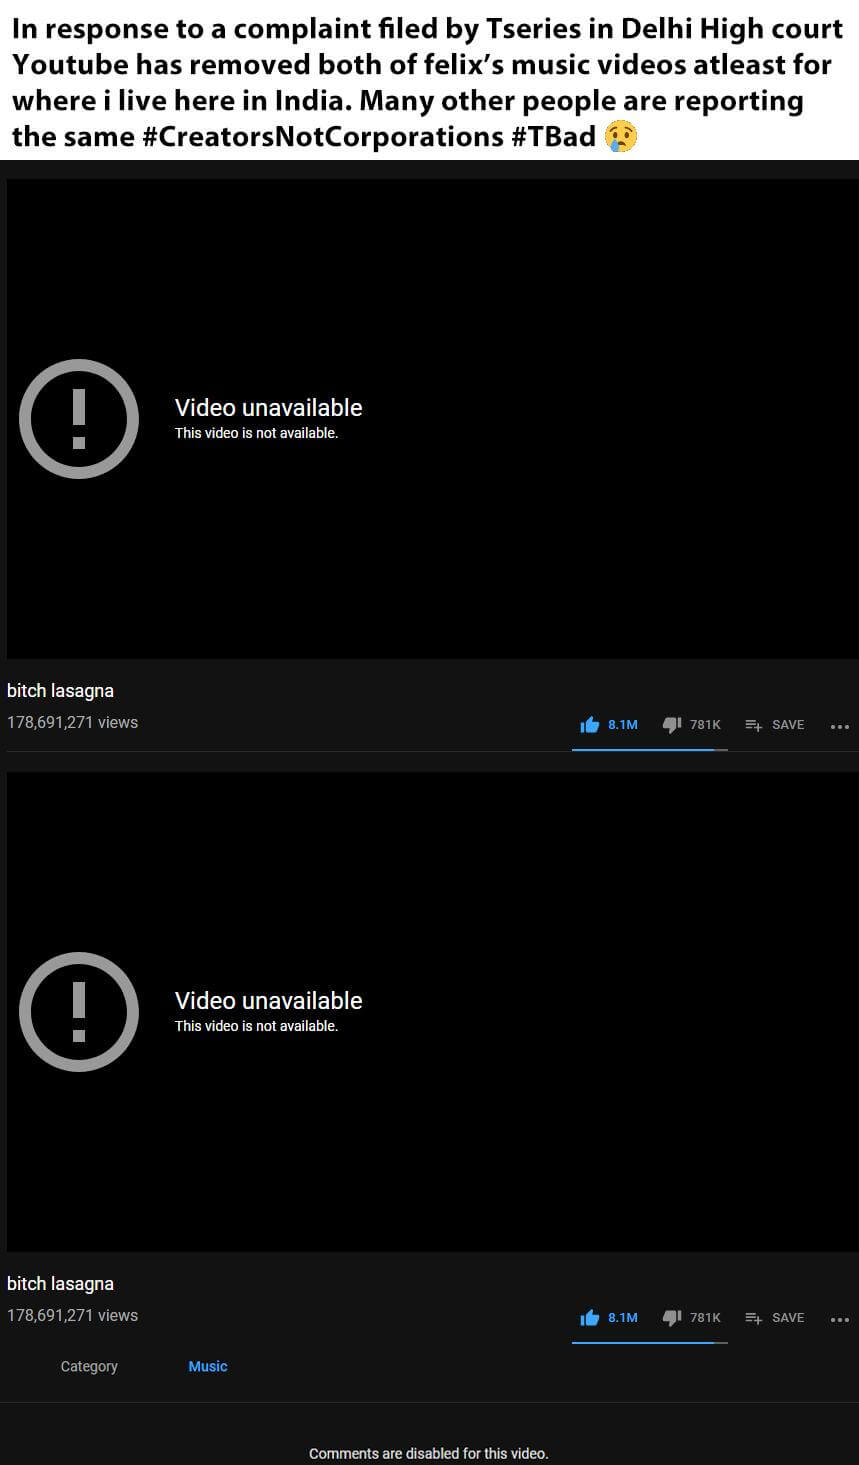 The “Video unavailable” message that shows when people try to access the PewDiePie diss tracks in India.